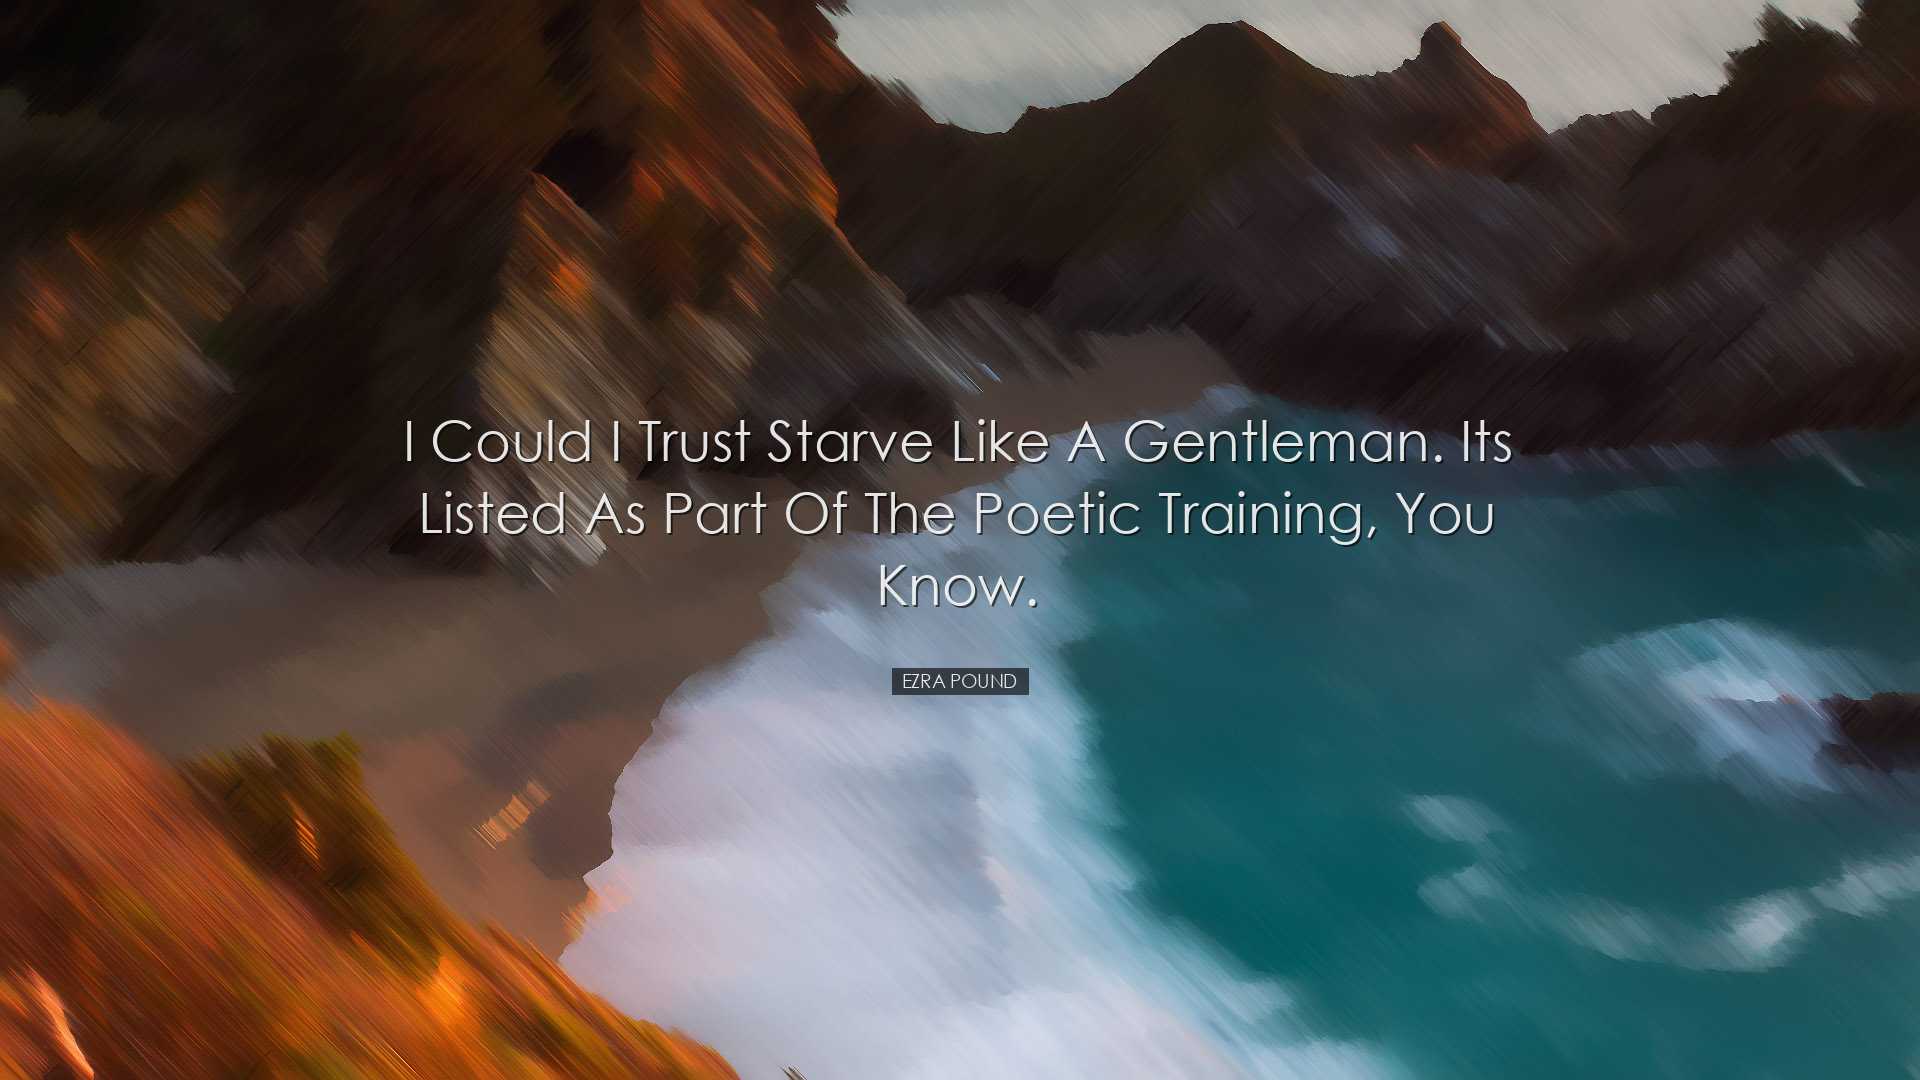 I could I trust starve like a gentleman. Its listed as part of the